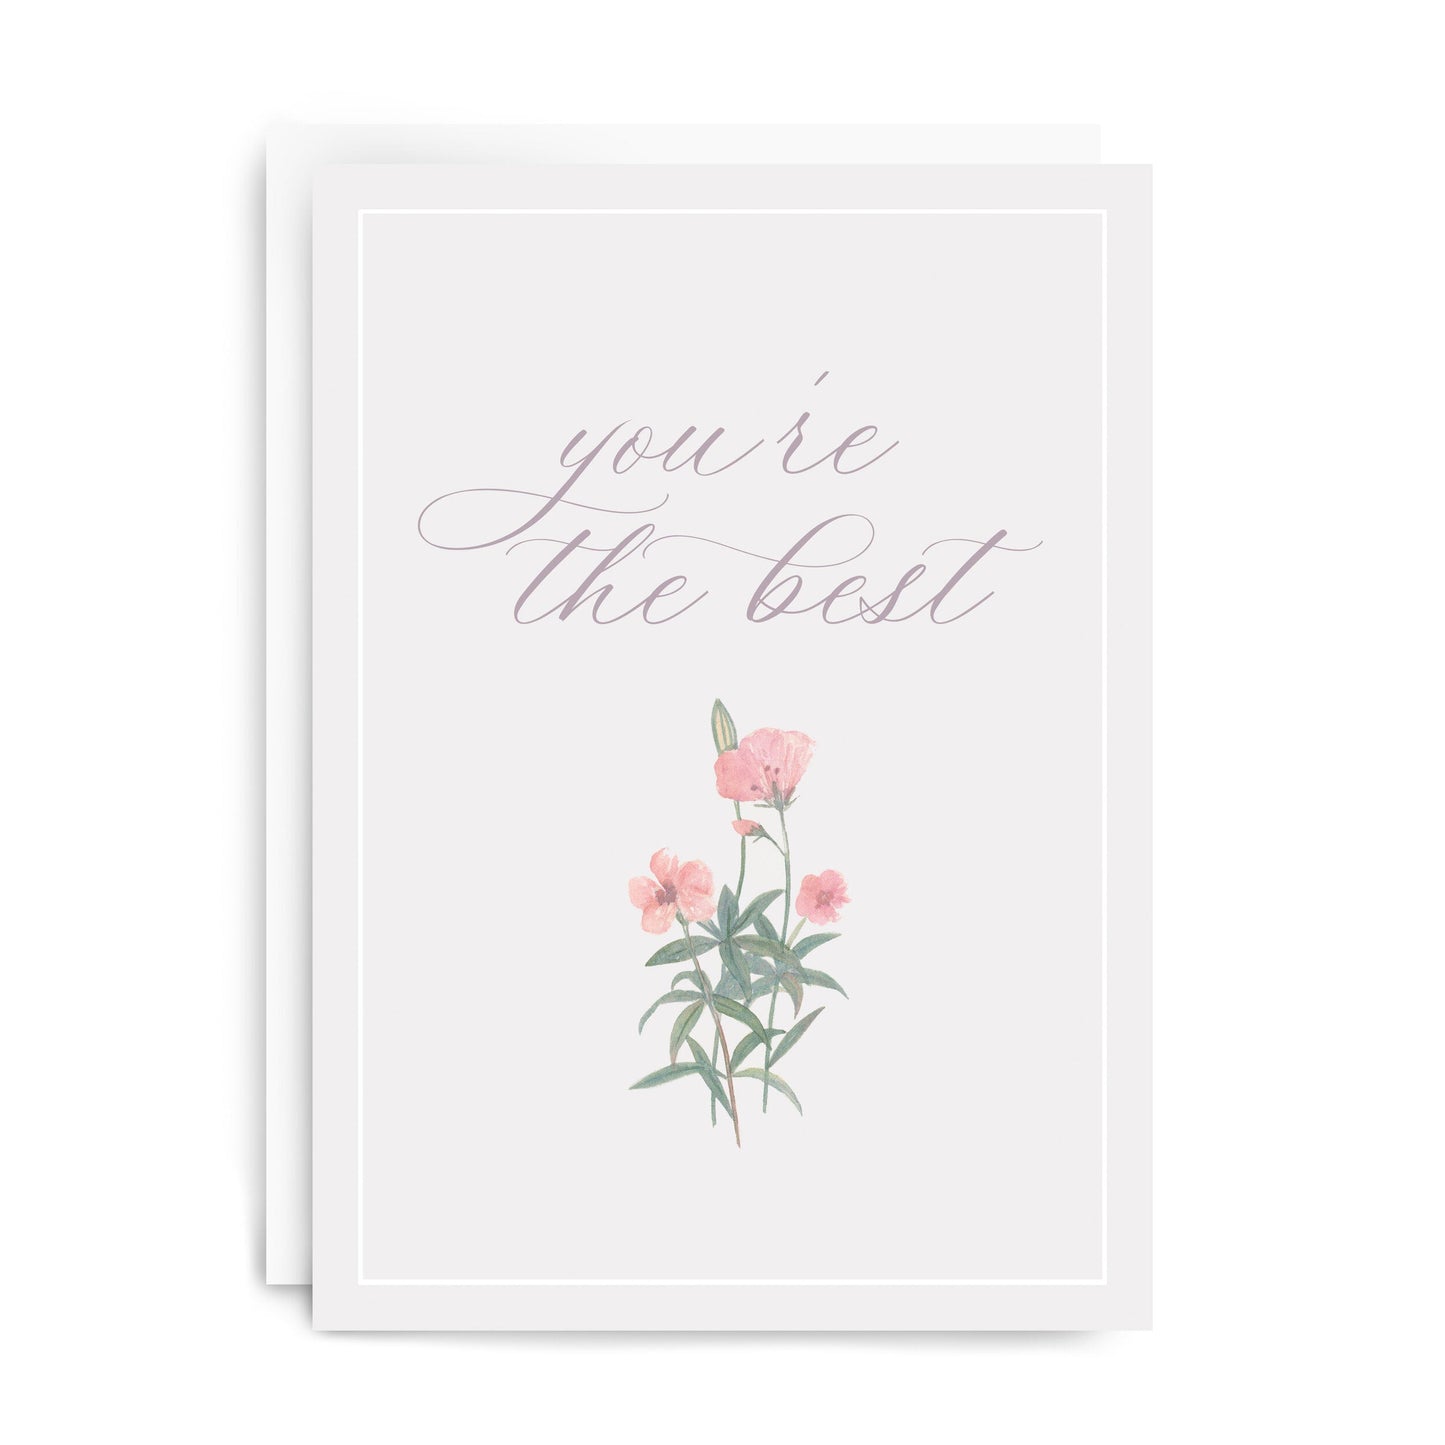 "You're The Best" Greeting Card